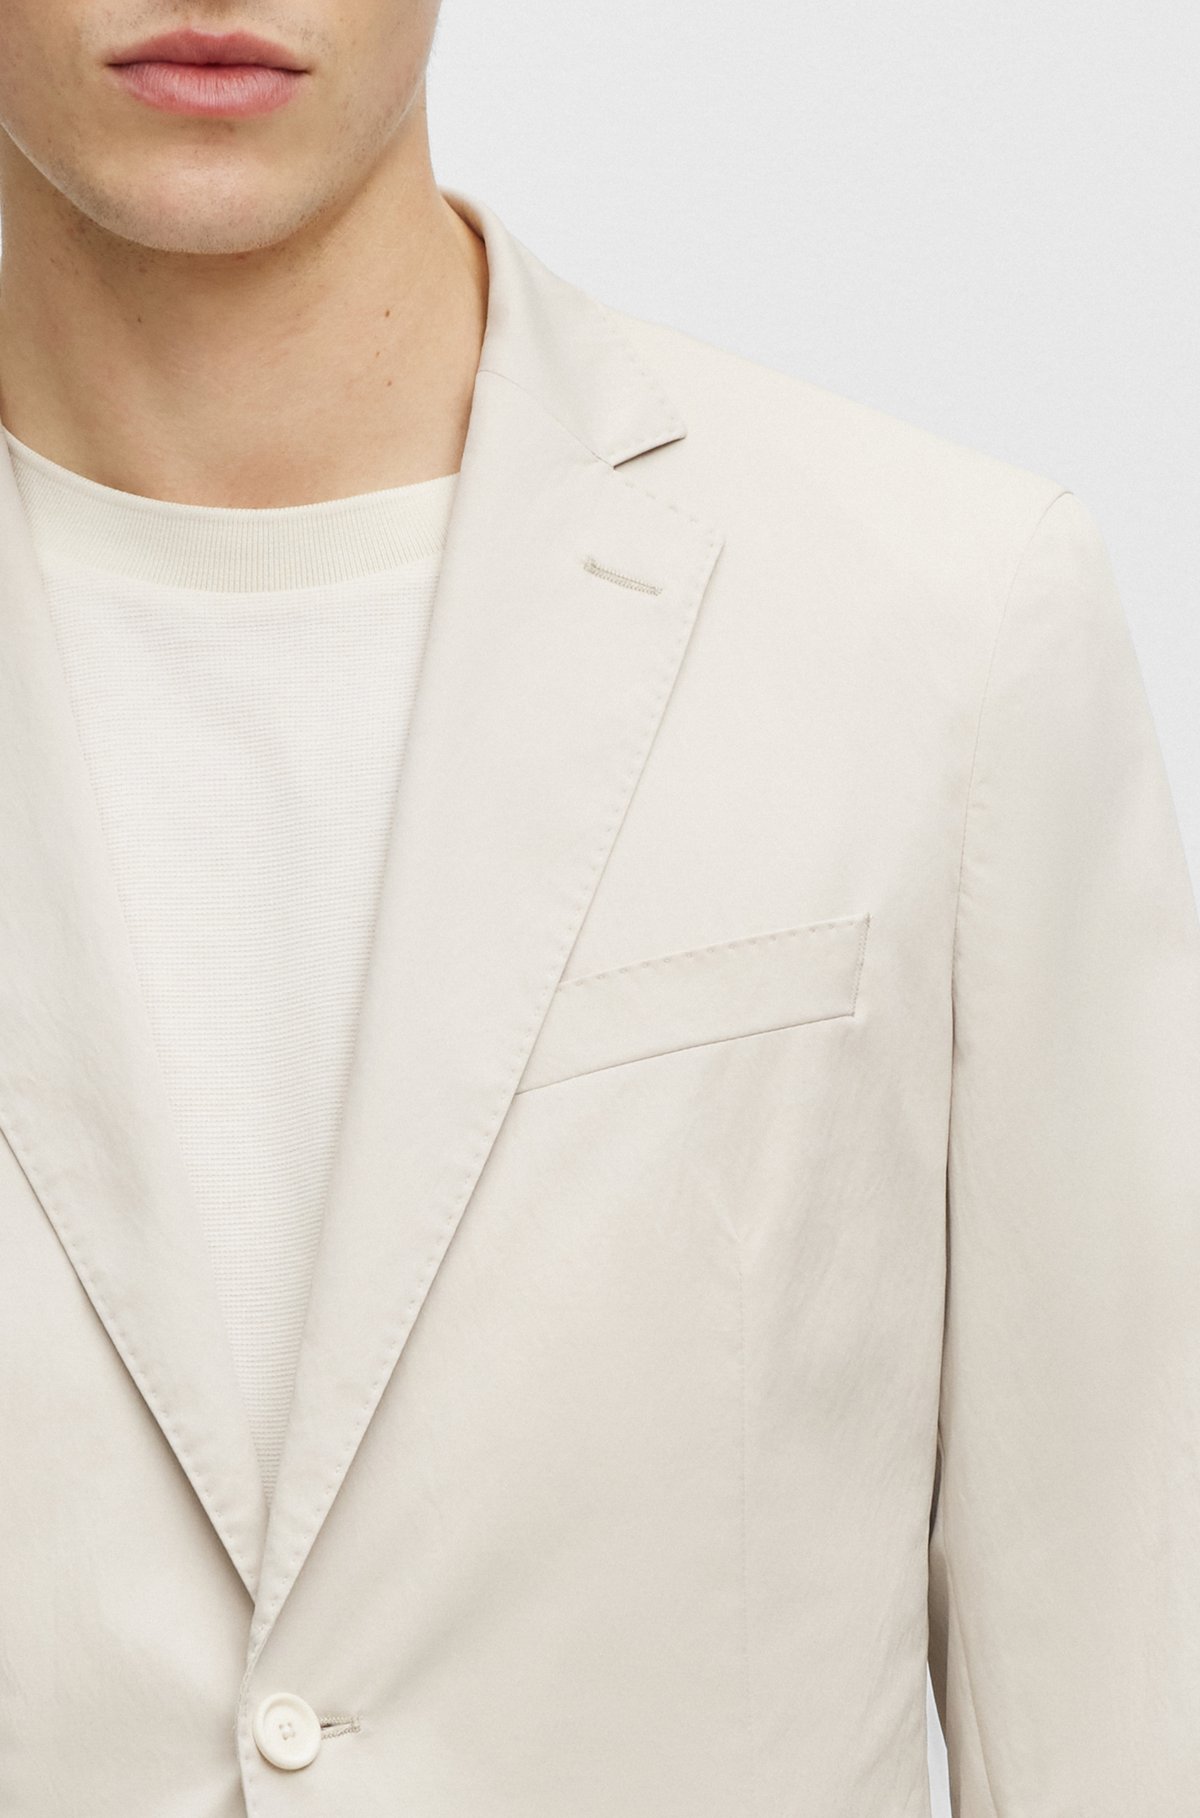 Slim-fit suit in water-repellent fabric, White